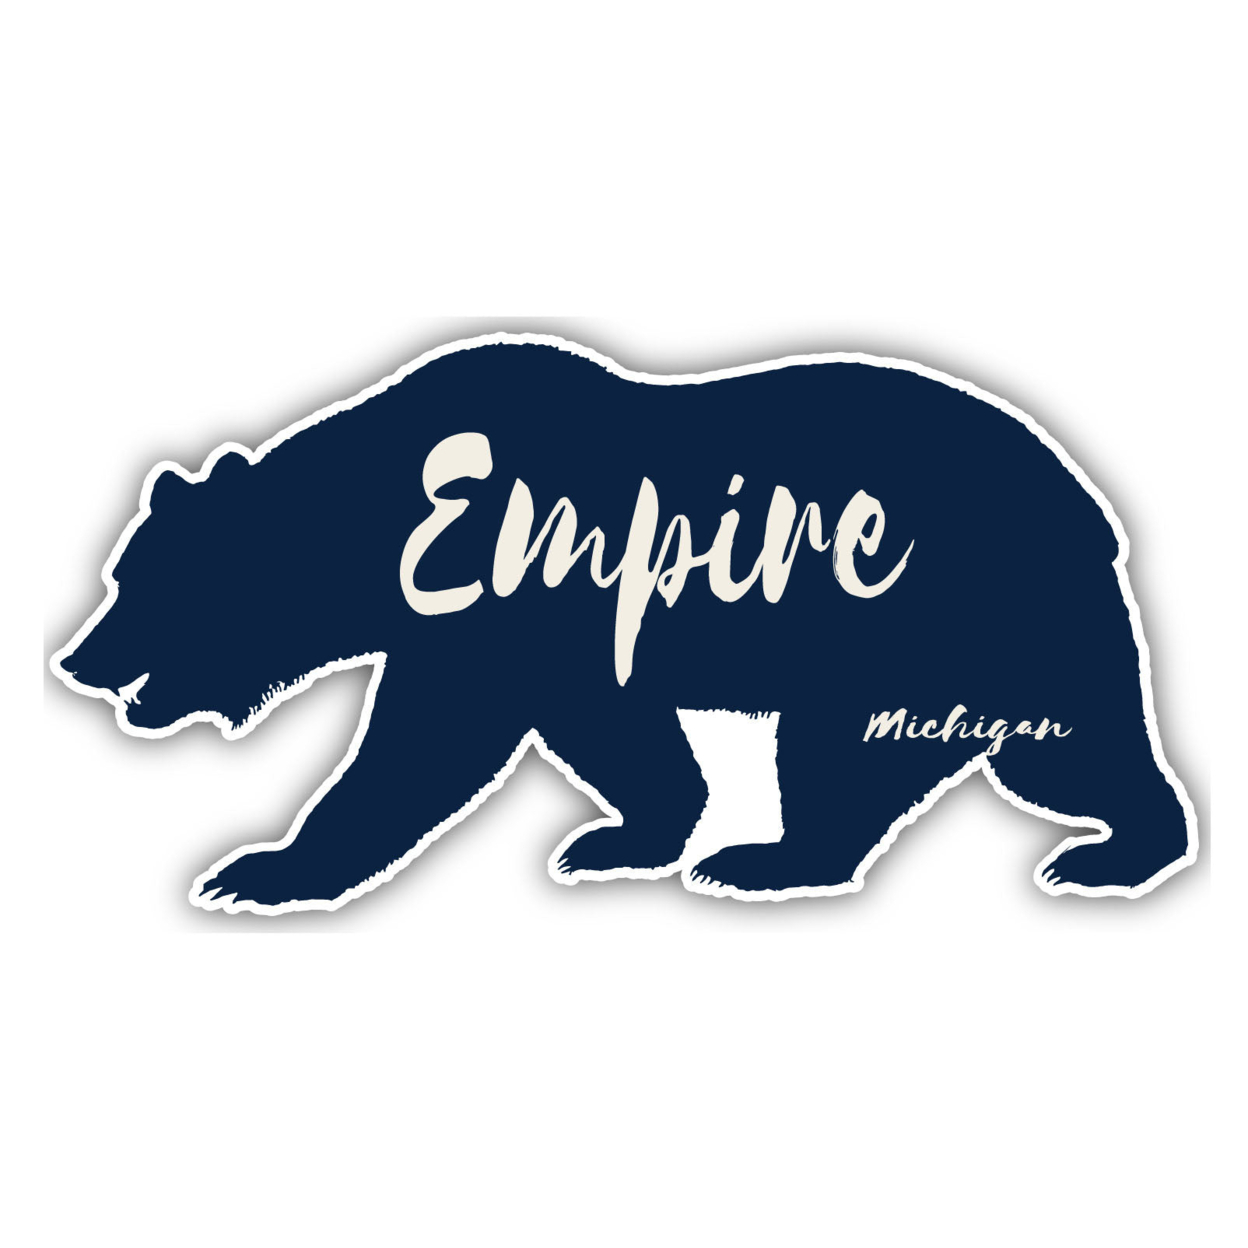 Empire Michigan Souvenir Decorative Stickers (Choose Theme And Size) - 4-Pack, 12-Inch, Bear